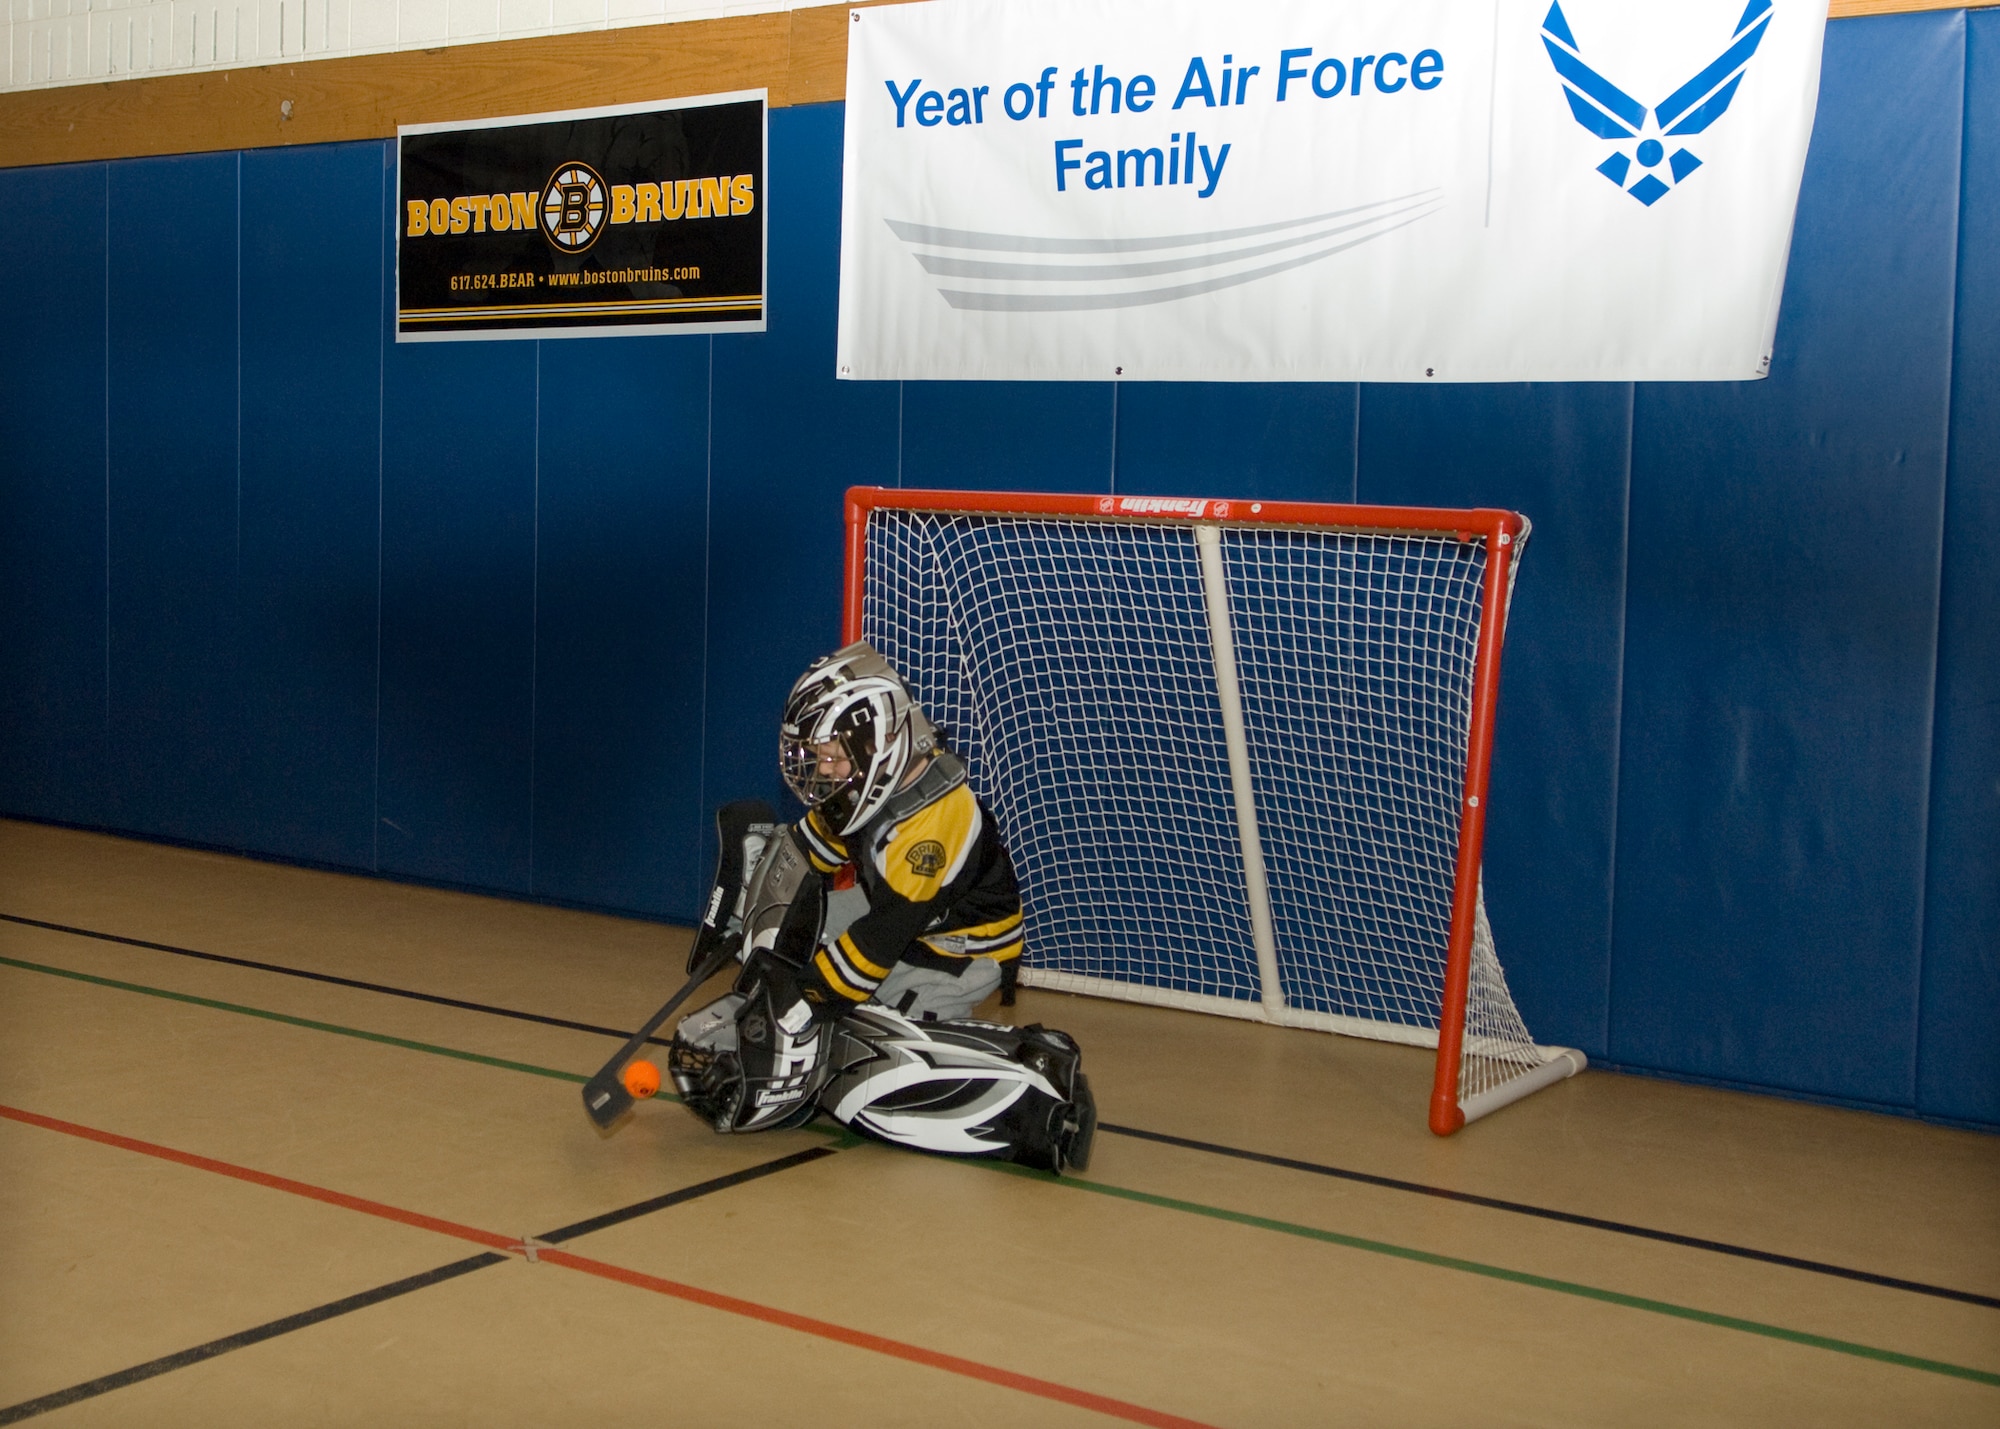 HANSCOM AIR FORCE BASE, Mass. – Justin Netemeyer blocks a shot on goal during an Air Force Family Week street hockey event at the Hanscom Youth Center Nov. 4, sponsored by the Boston Bruins and Operation Homefront. Former Boston Bruins player Tommy Songin, along with other Bruins staff, led Hanscom children through a number of street hockey drills focusing on the fundamentals of play. (U.S. Air Force photo by Walter Santos)